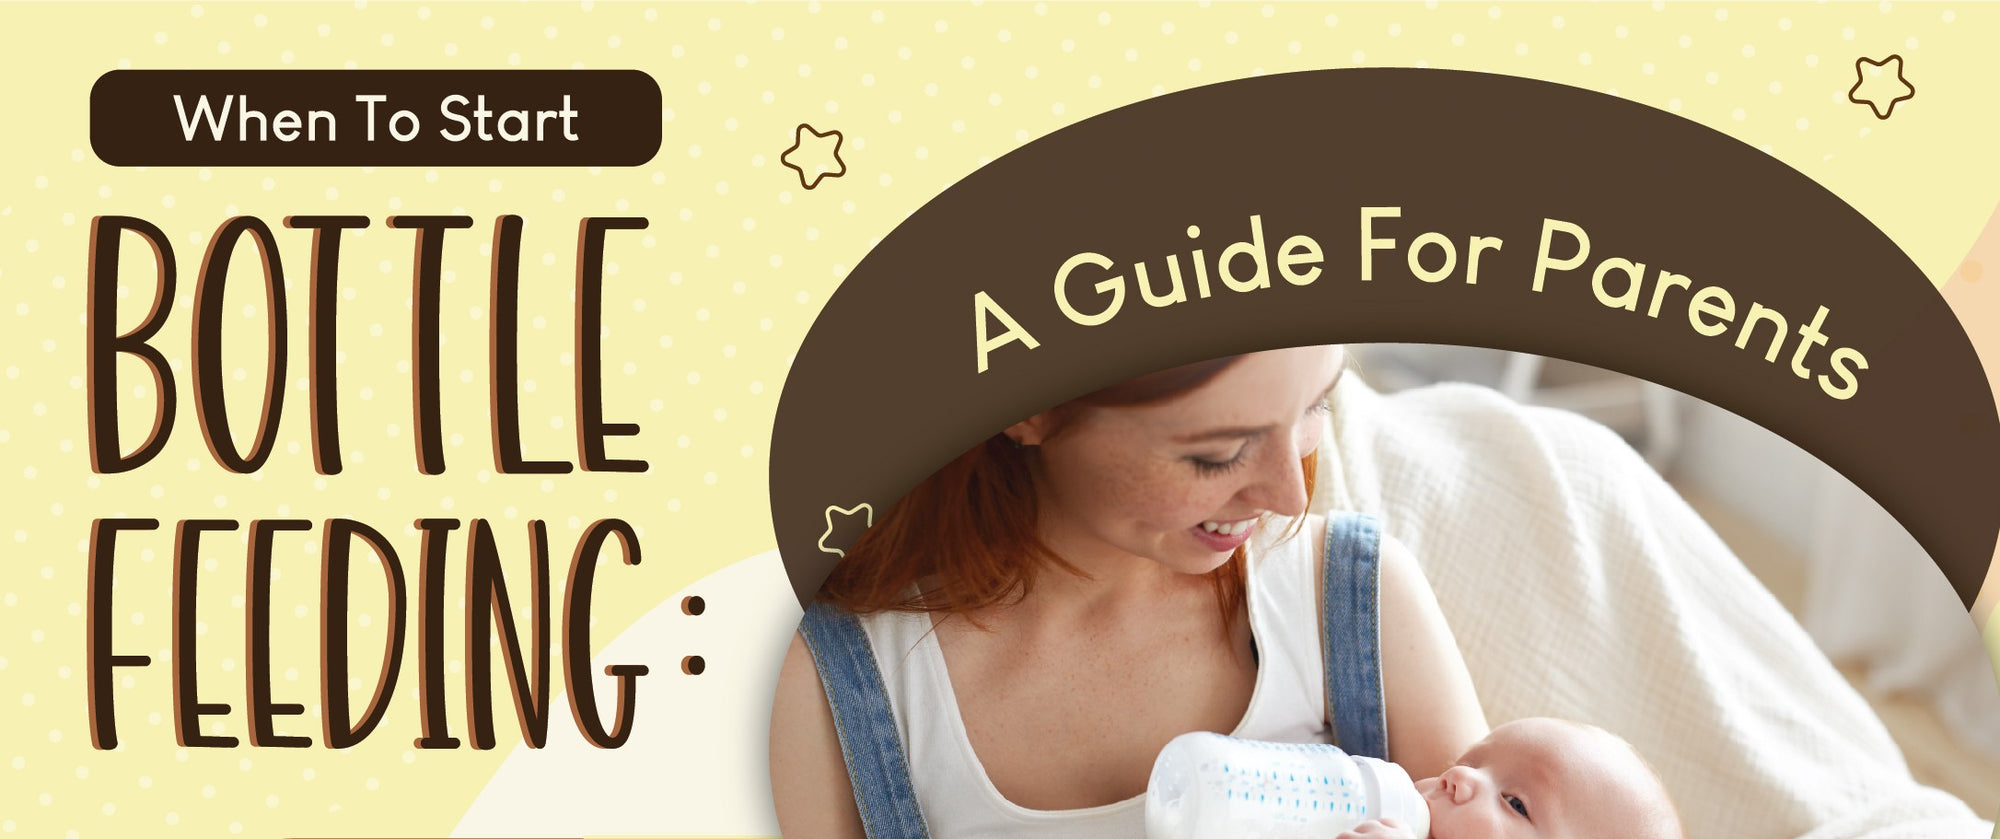 When To Start Bottle Feeding: A Guide For Parents